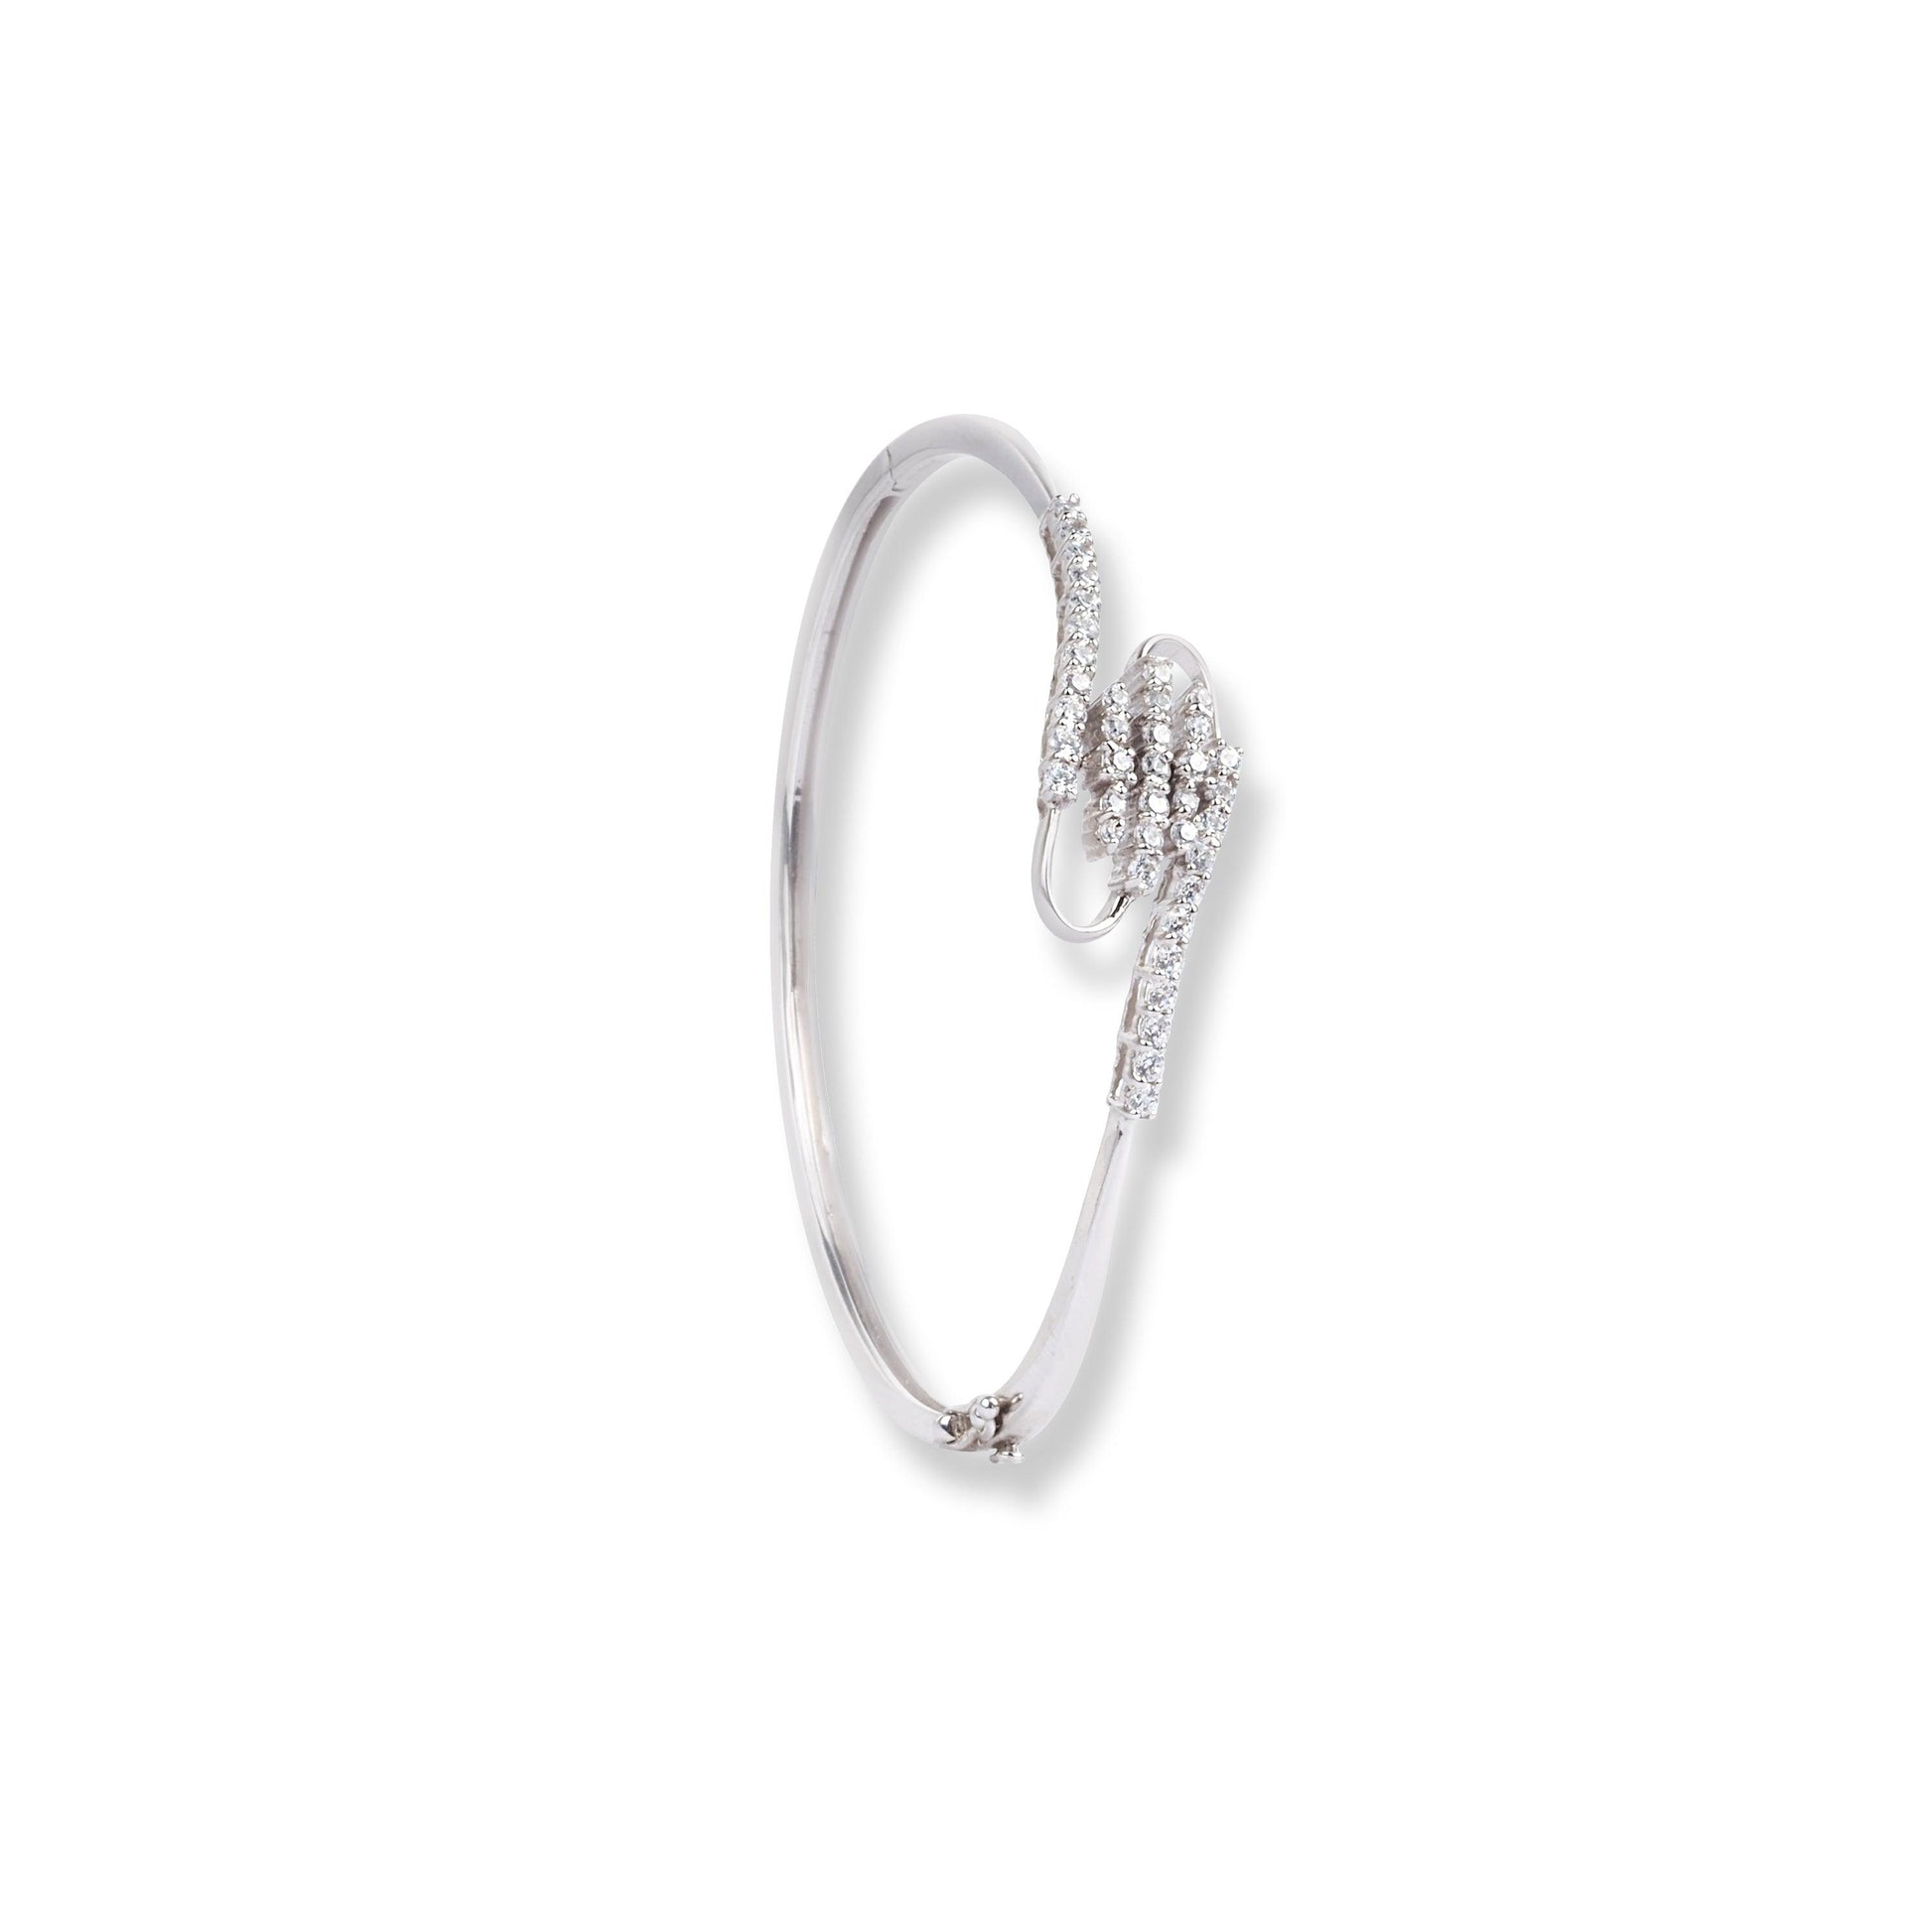 18ct White Gold Openable Bangle with Cubic Zirconia Stones LR13001 - Minar Jewellers